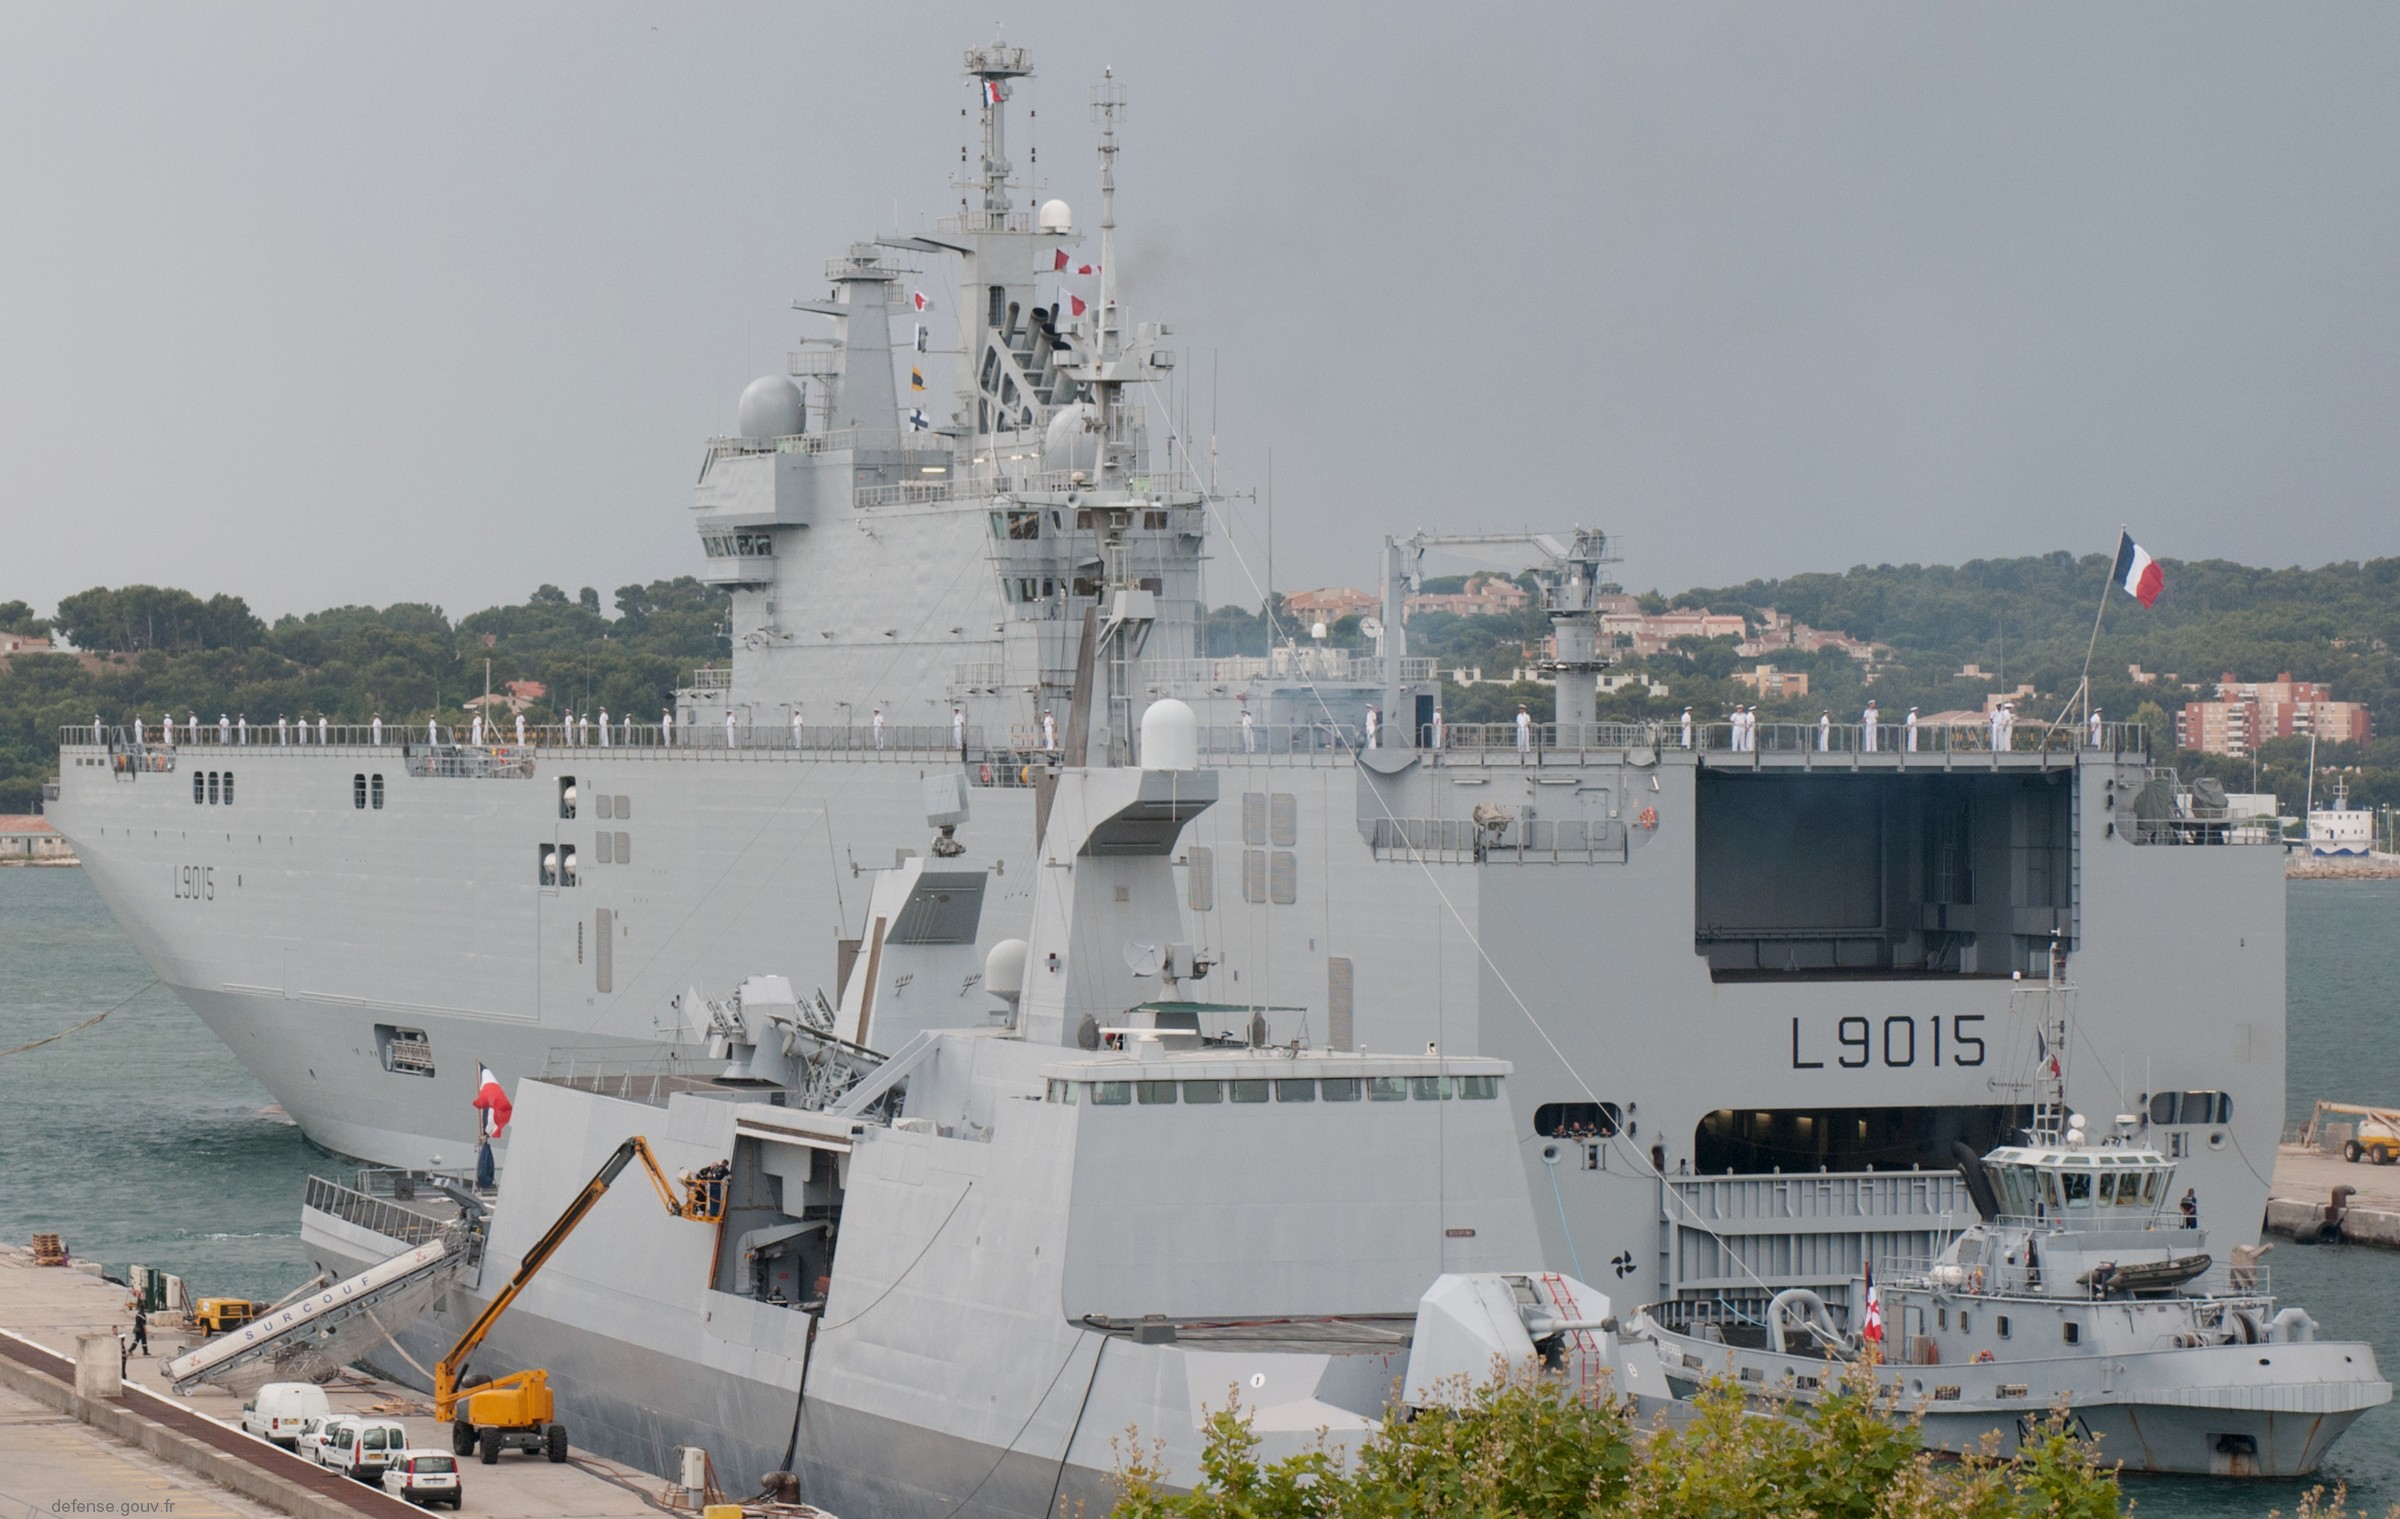 l-9015 fs dixmude mistral class amphibious assault command ship bpc french navy marine nationale 20